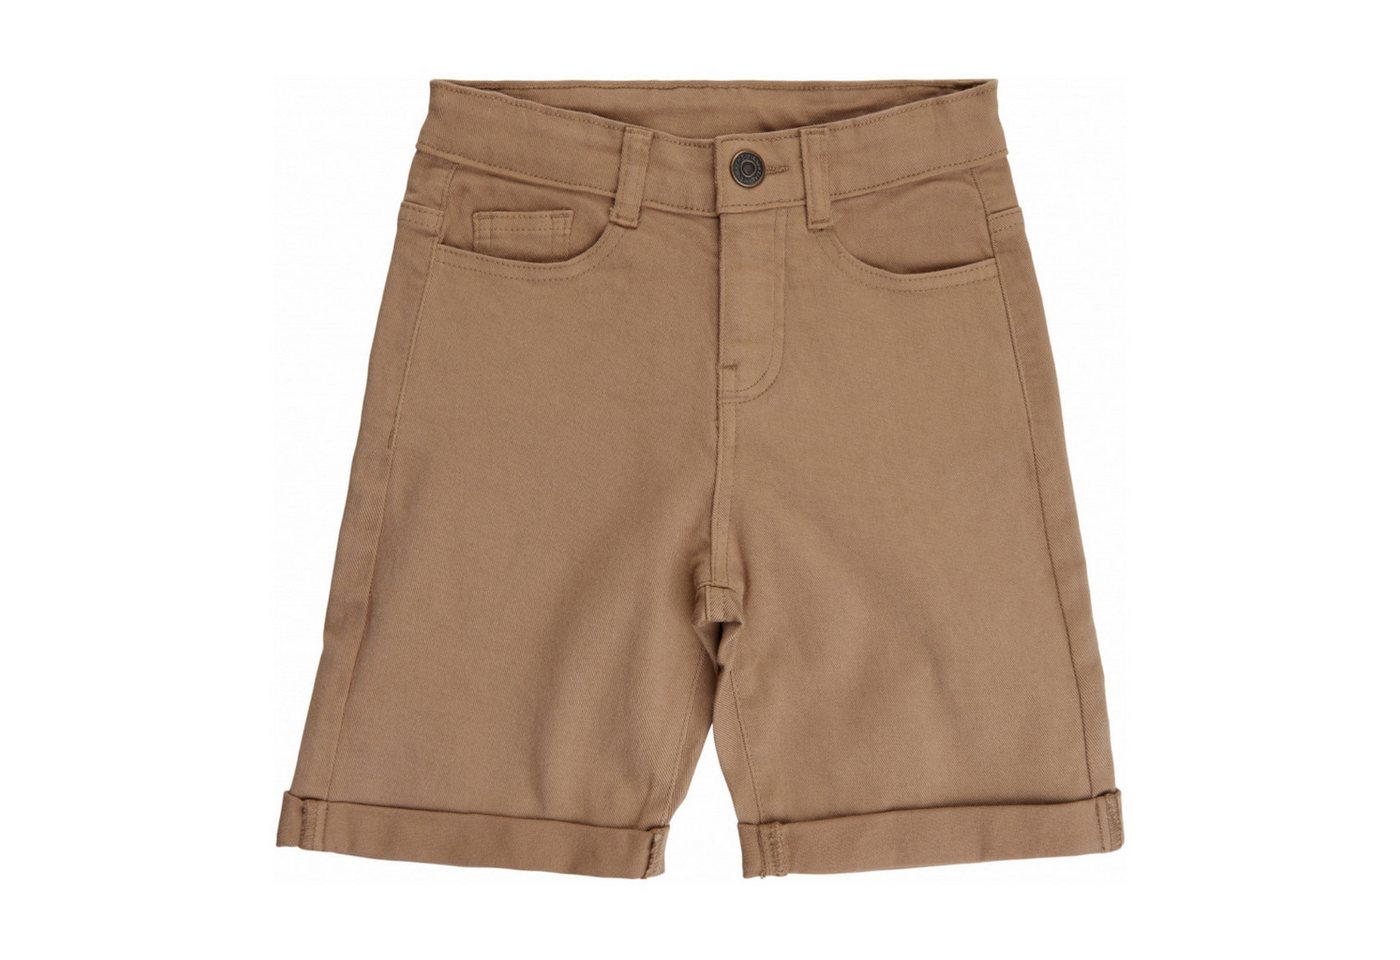 The New Shorts The New Une kurze Shorts 134/140 von The New